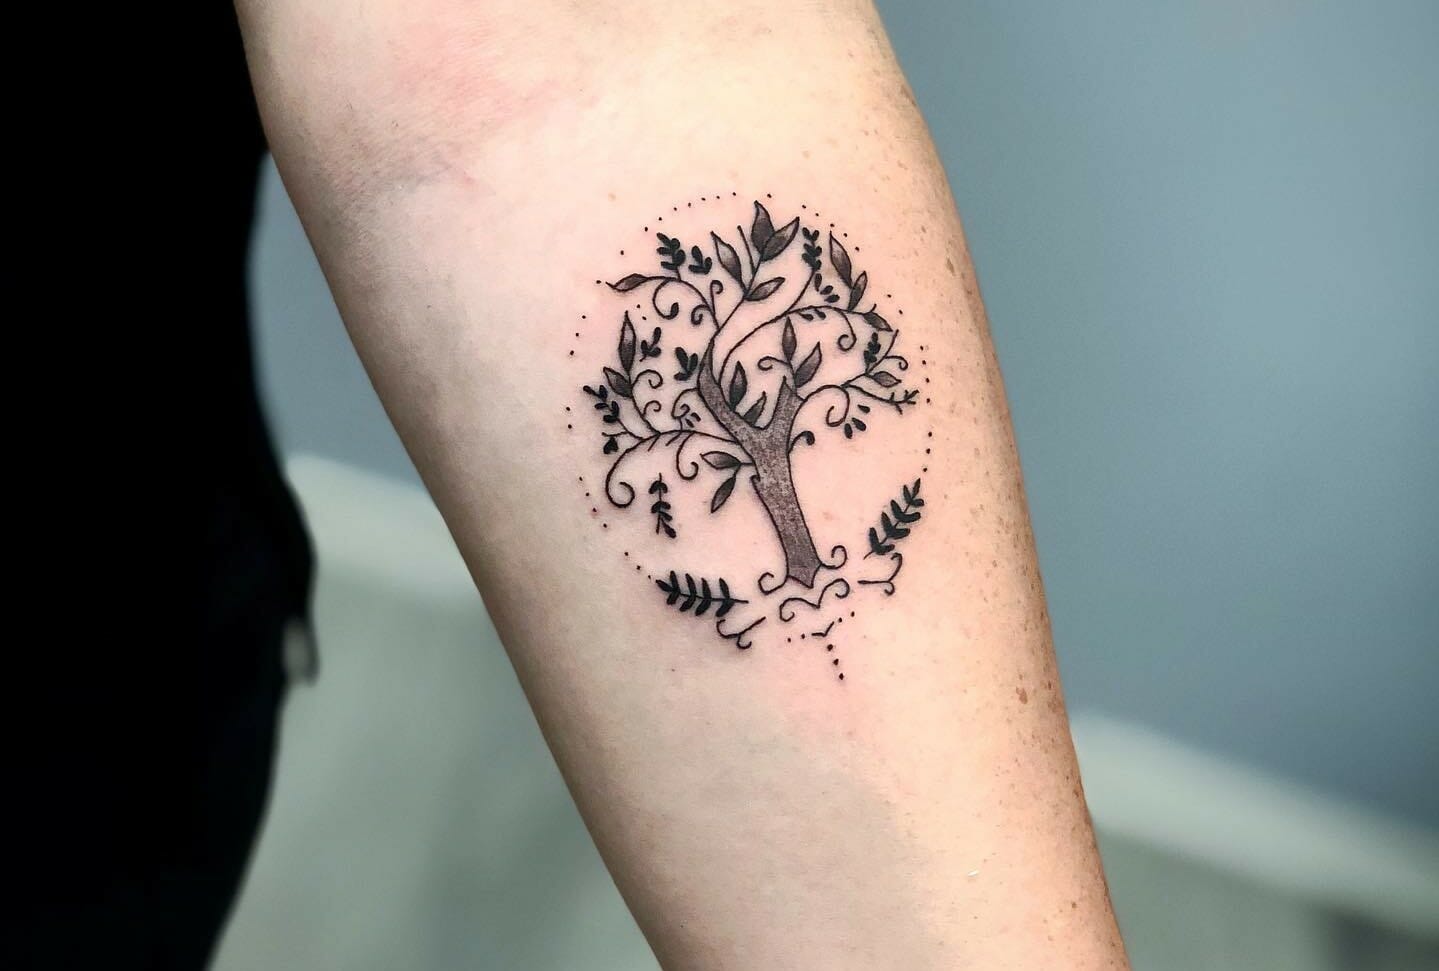 10 Best Small Tree of Life Tattoo Ideas That Will Blow Your Mind! - Outsons